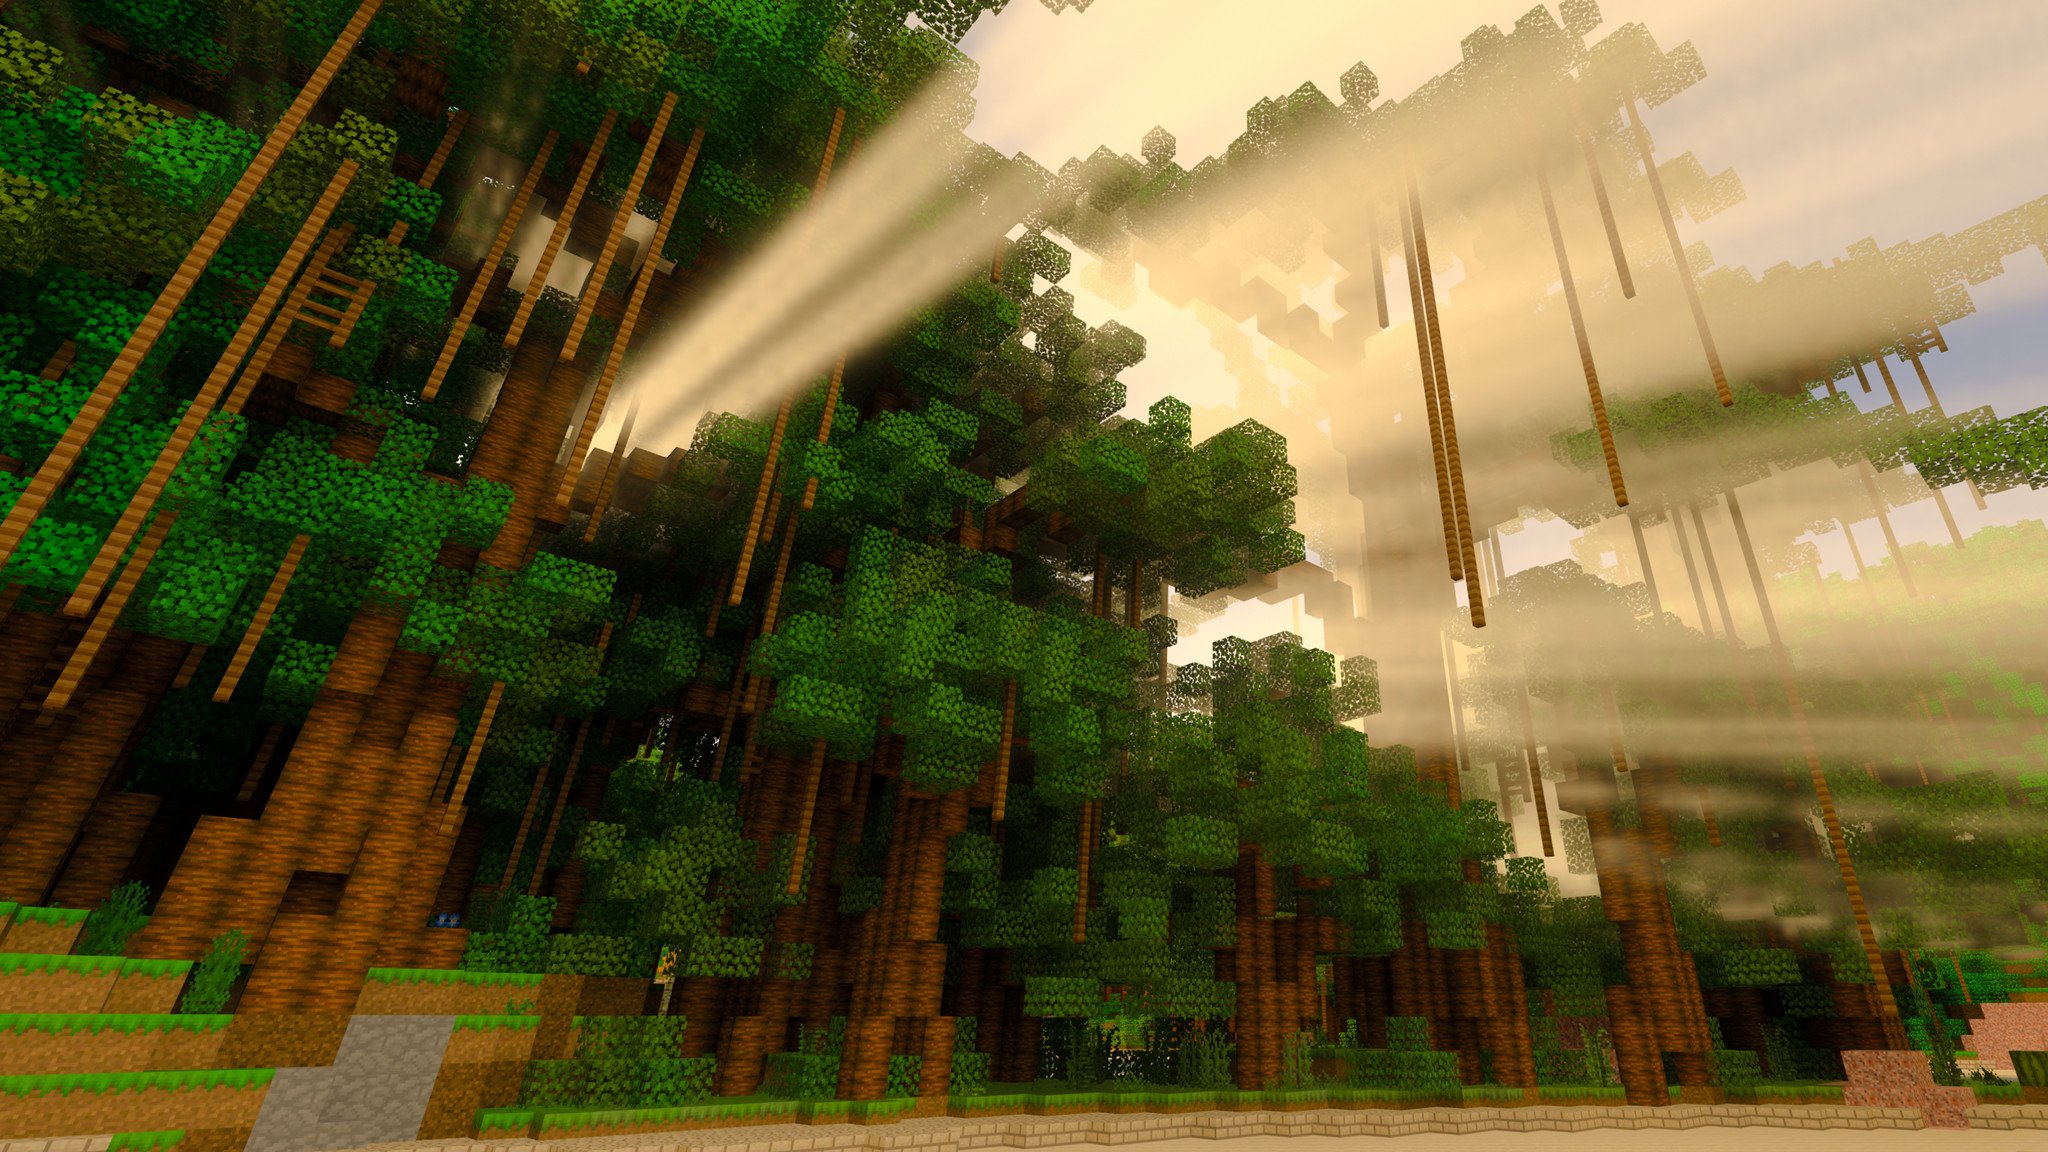 Minecraft with path tracing enhancements looks amazing